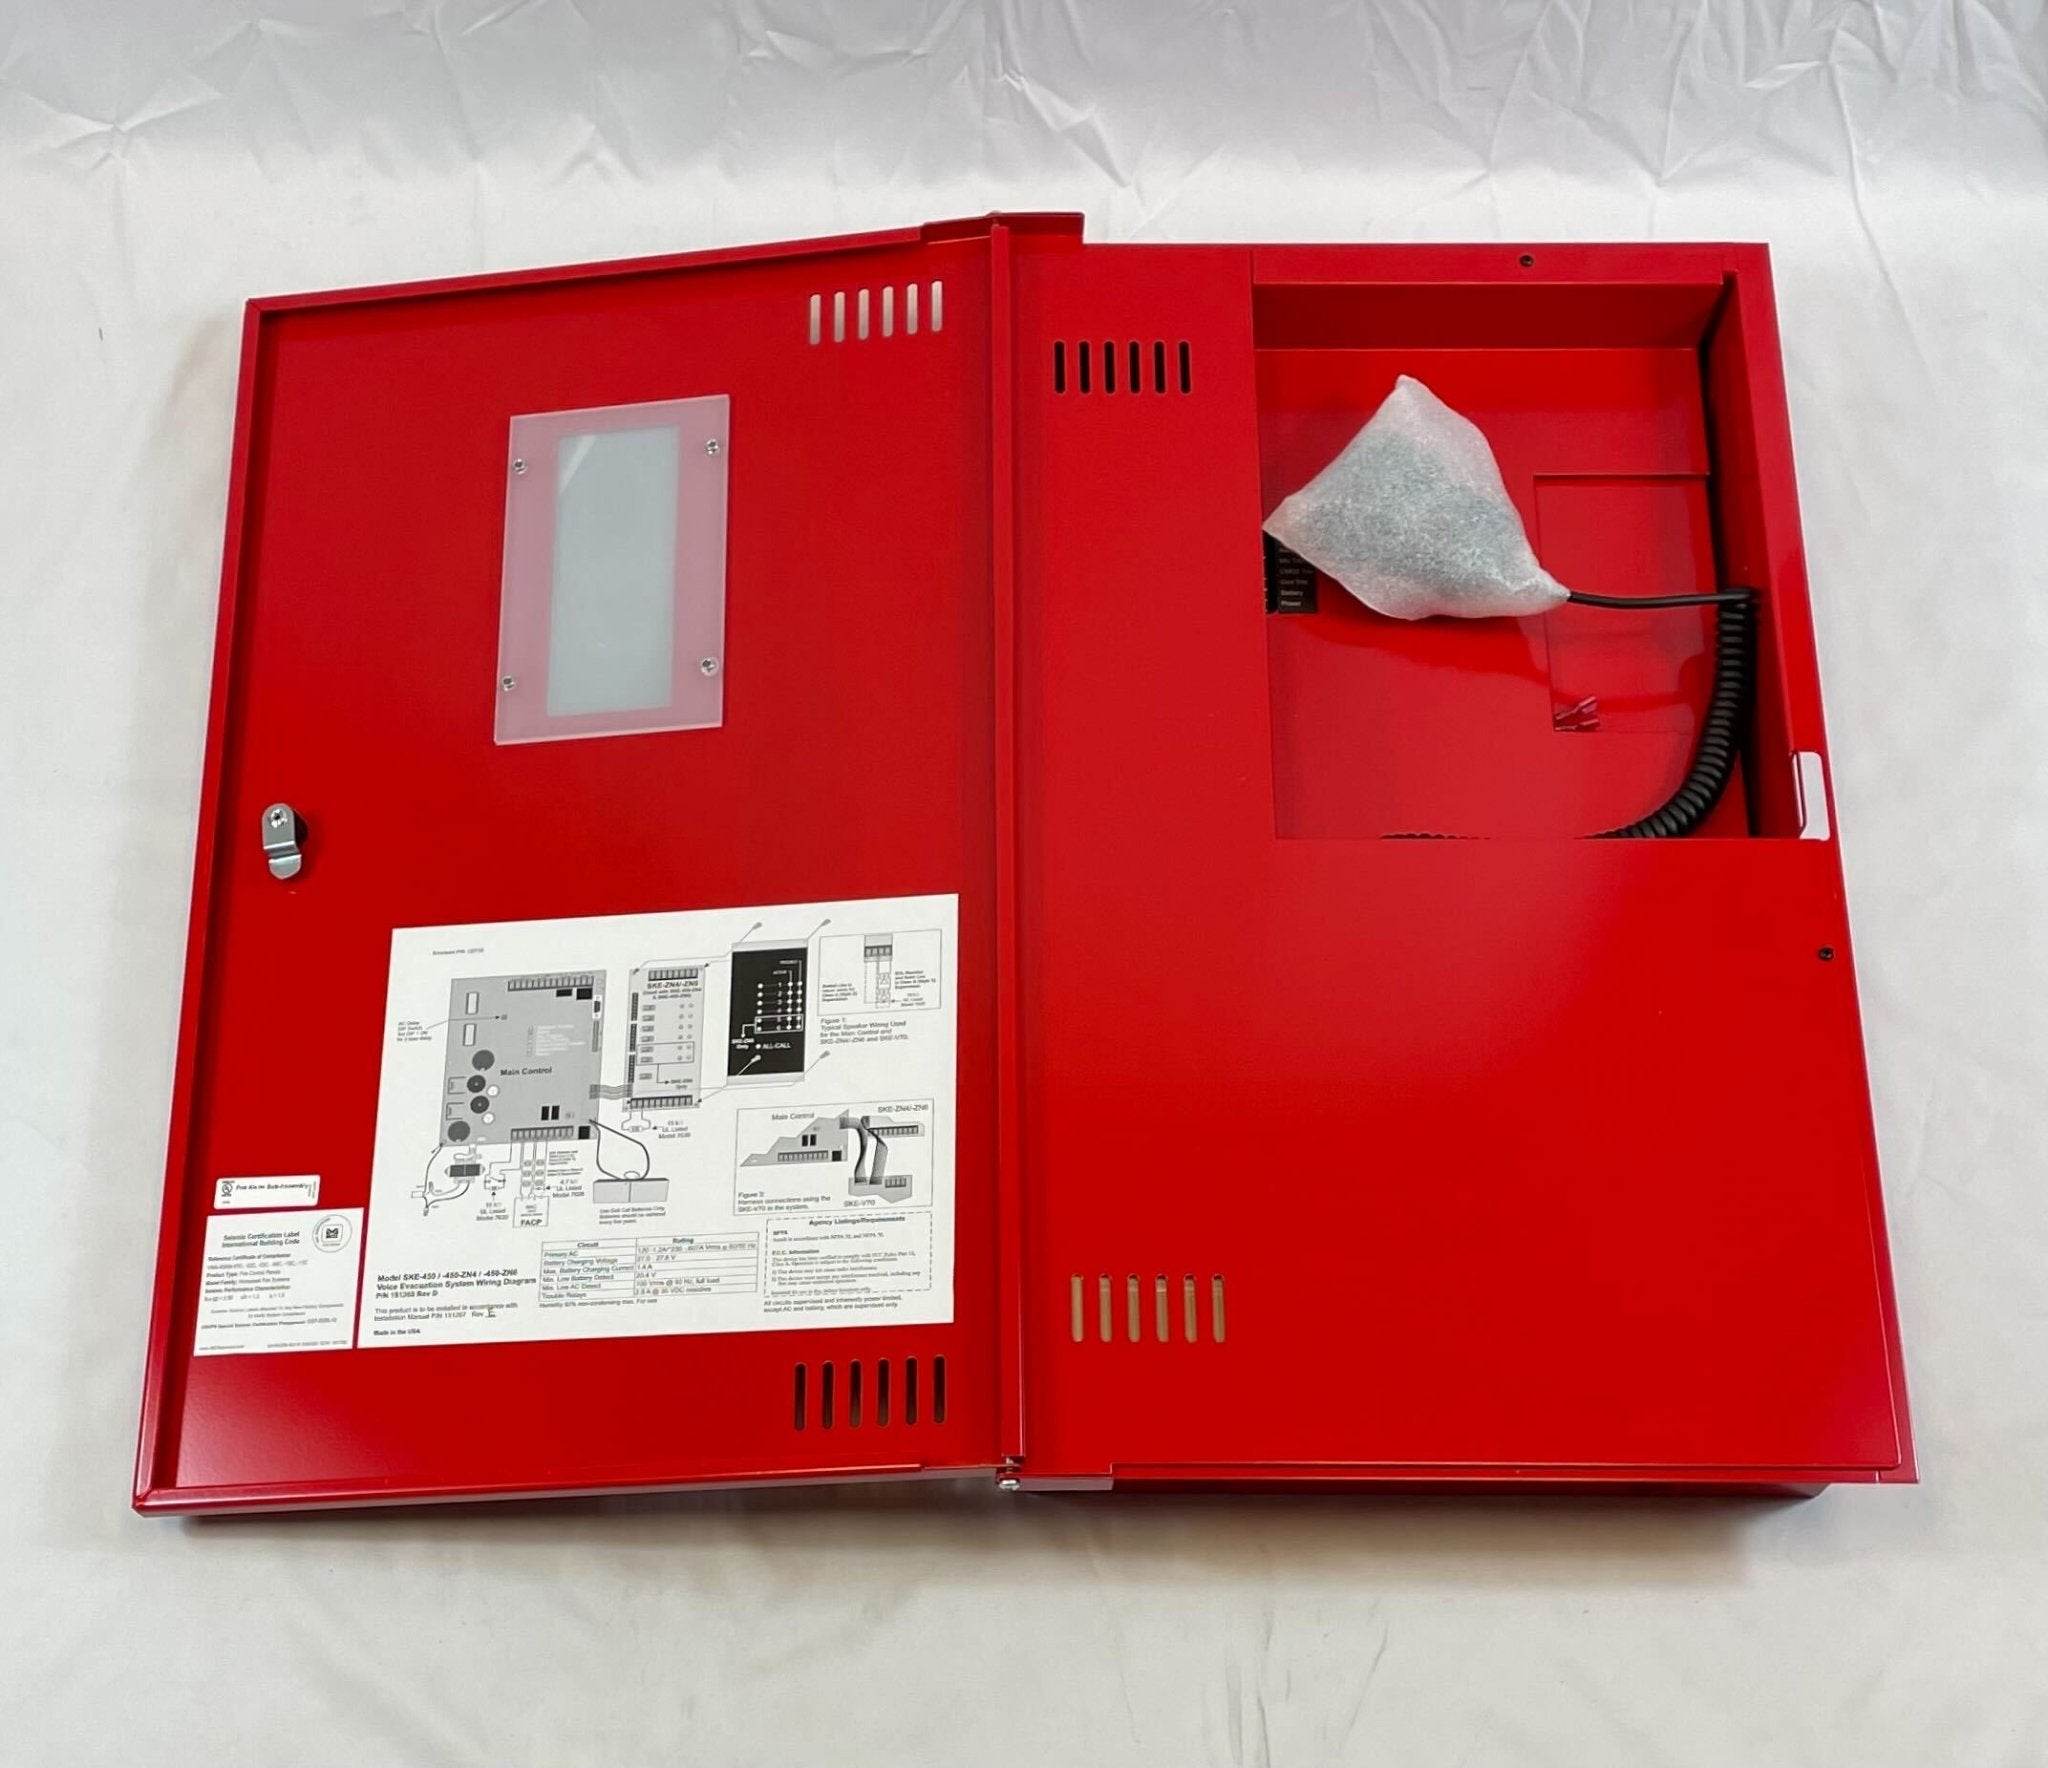 Silent Knight SKE-450 Voice Evacuation System - The Fire Alarm Supplier